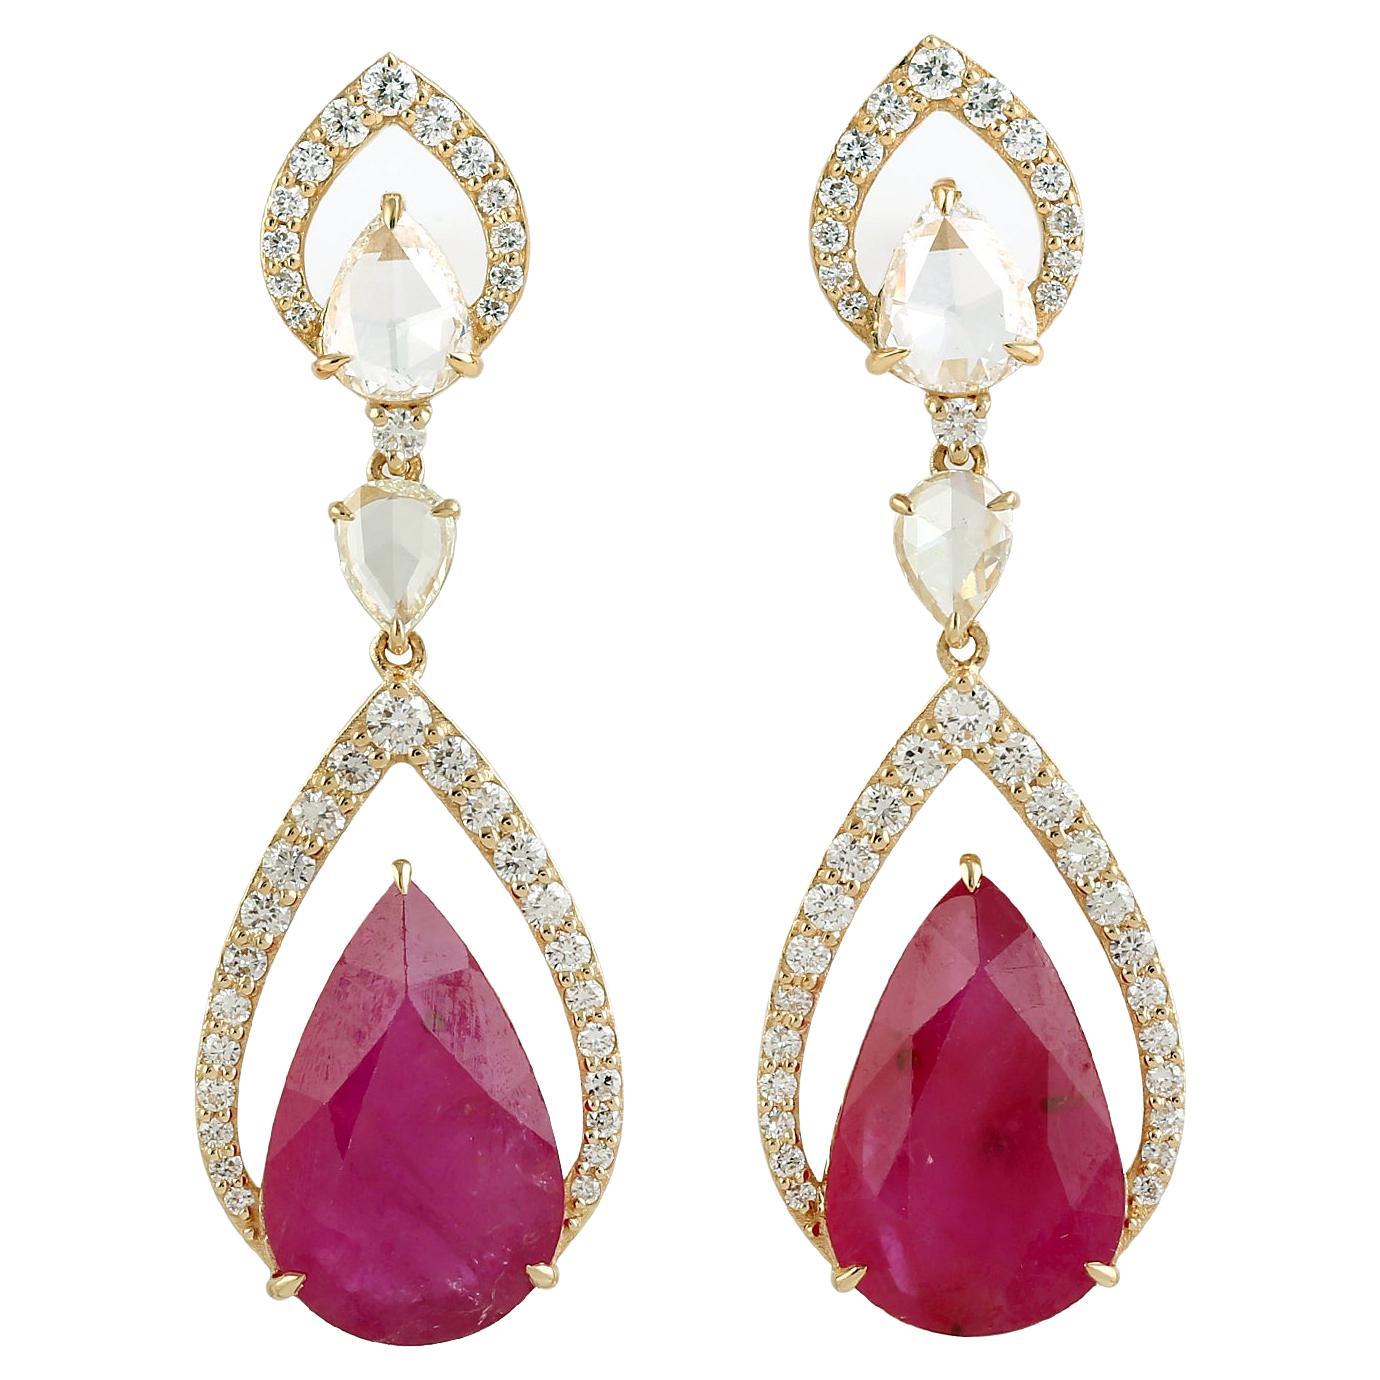 Two Tier Mosambic Ruby Dangle Earrings With Diamonds Made In 18k White Gold